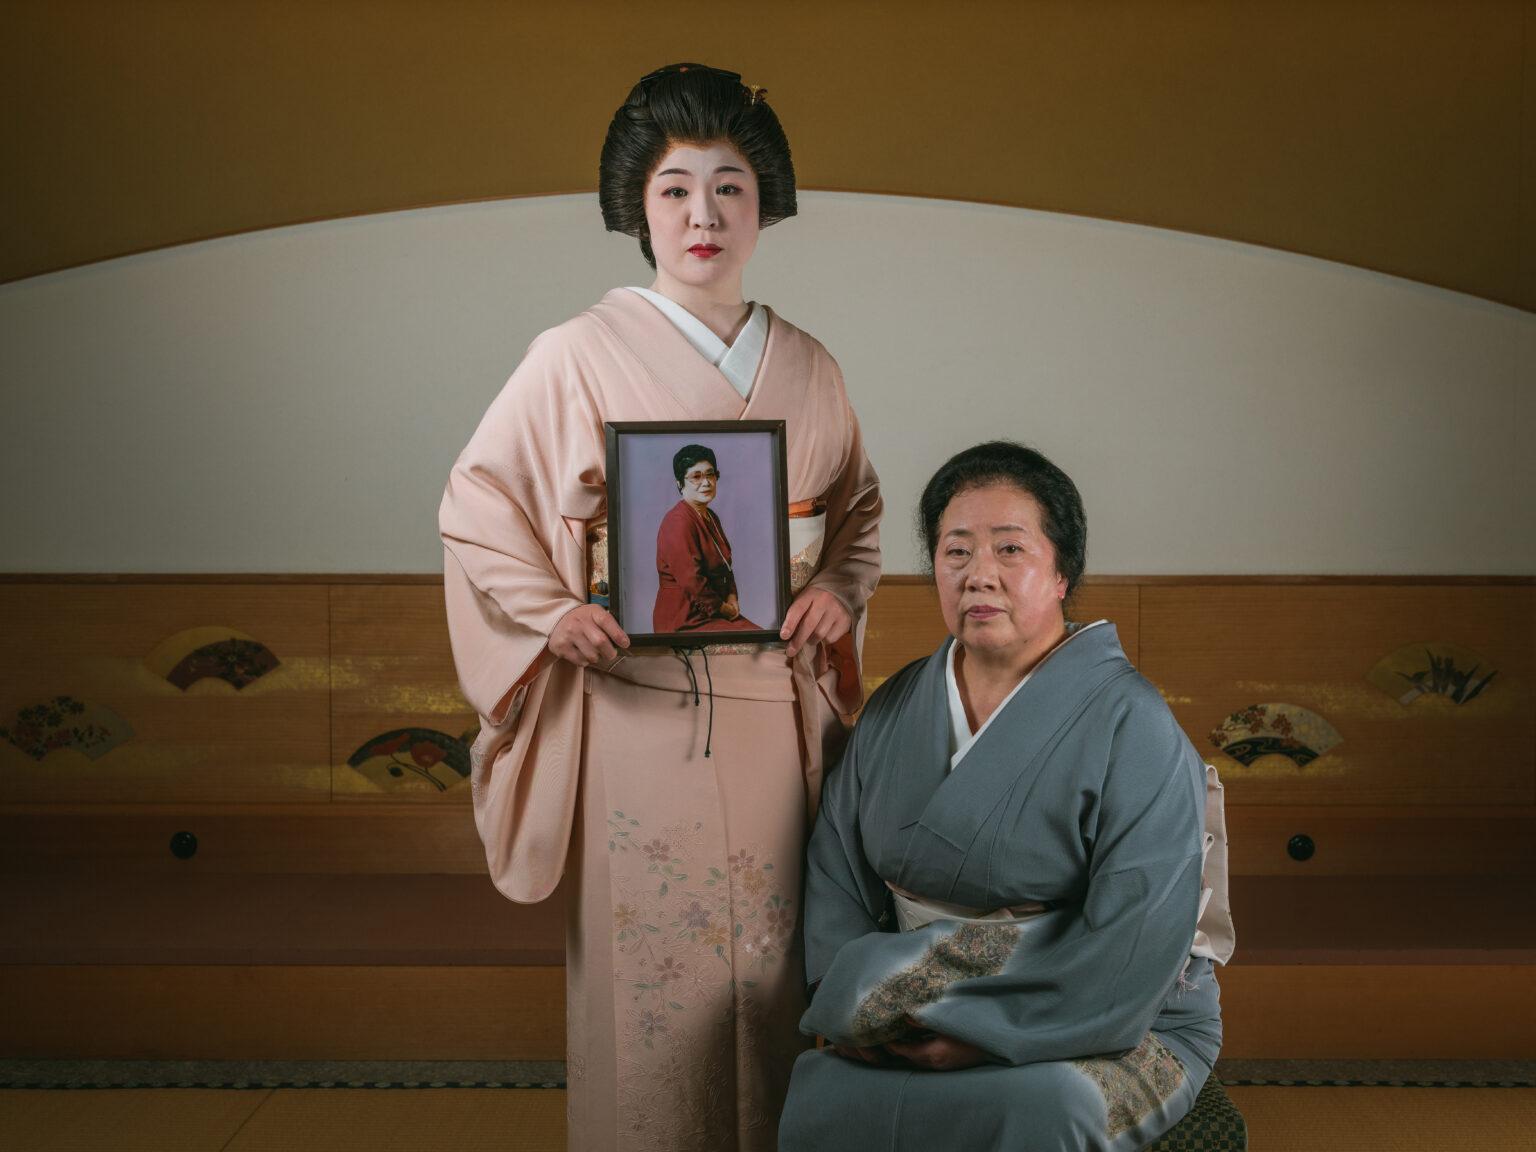 Mai Watanabe (L) poses holding her grandma picture as her mom Michiyo sit beside for a portrait picture inside a restaurant called Mangero on April 24, 2022 in Aizuwakamatsu, Japan. Mai Watanabe is the 3rd generation of Geisha from her family’s geisha house called “Hana no Ya”. Her grandmother founded the house in 1954 in Higashiyama Onsen, Aizuwakamatsu. Photo by Nicolas Datiche